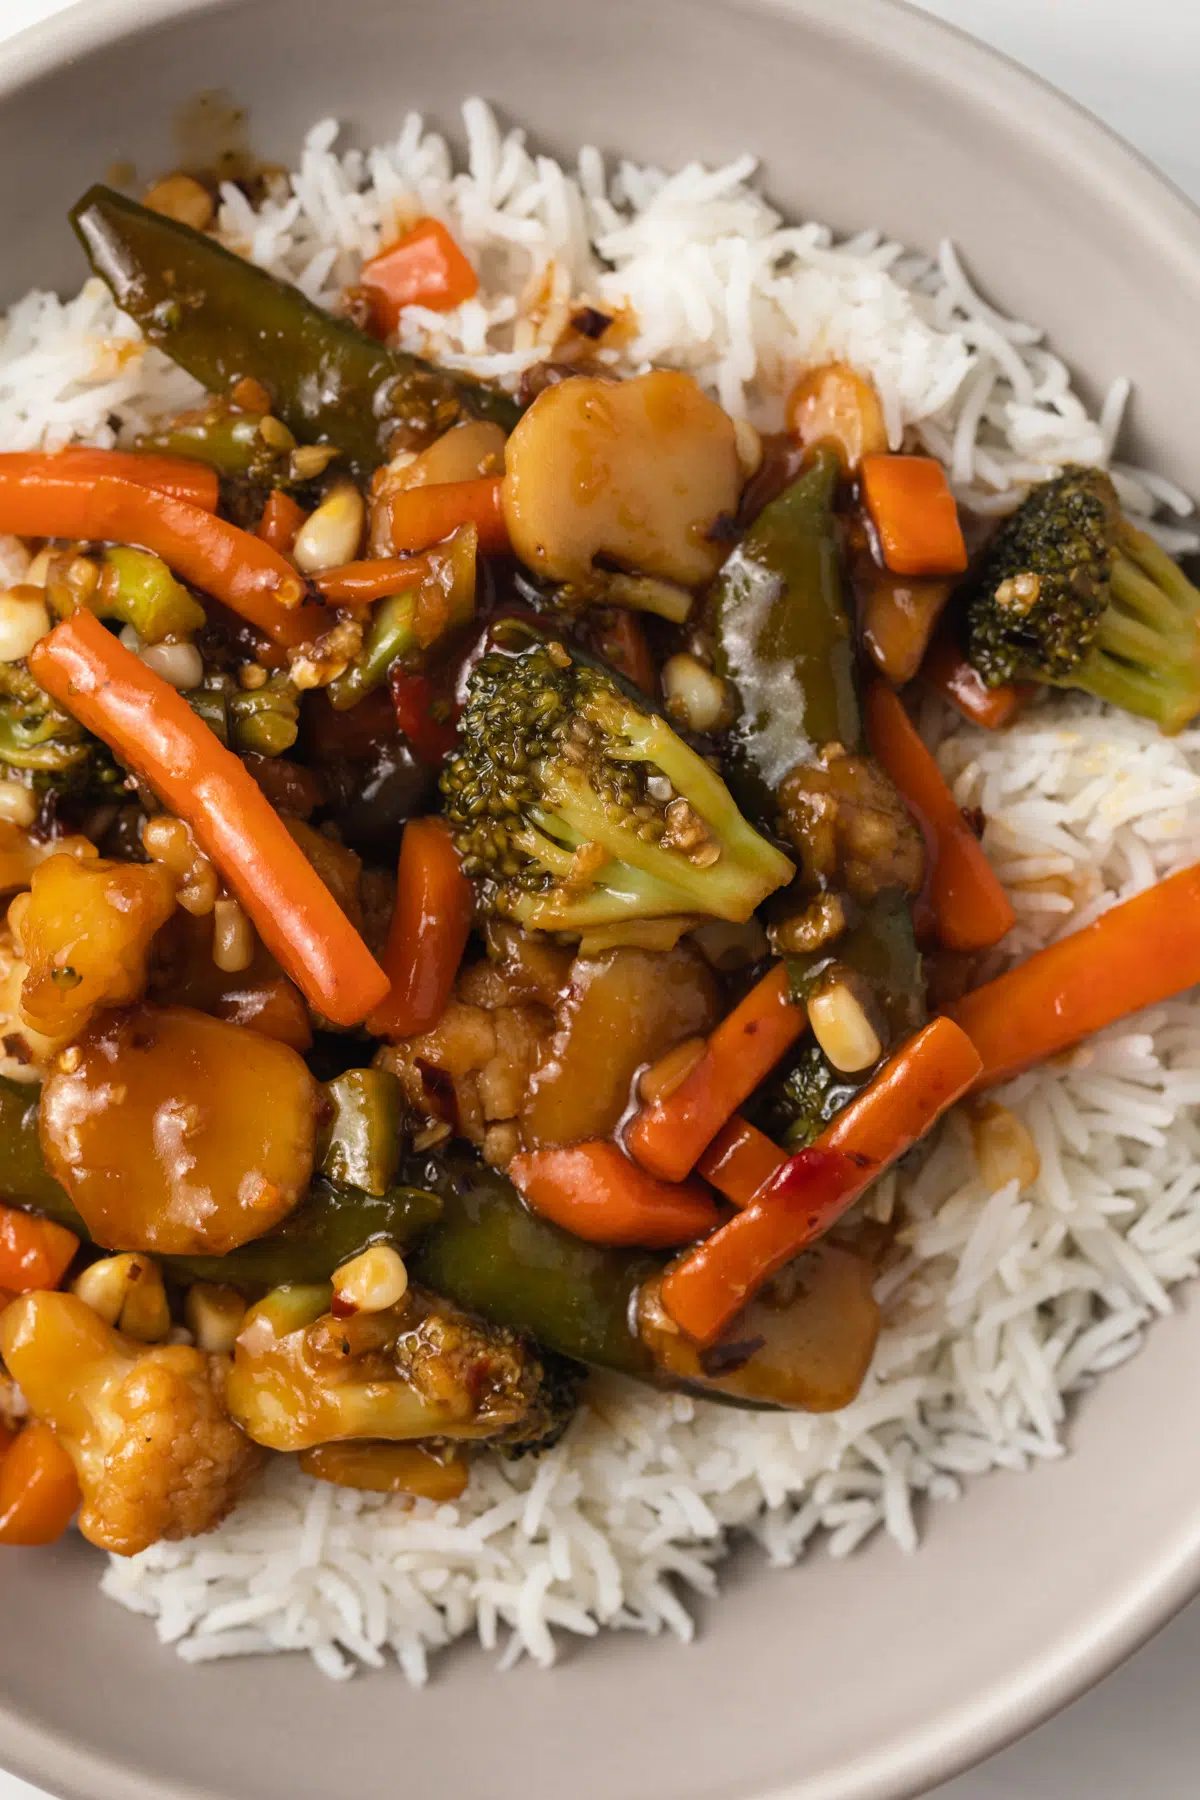 Vegetables and rice with stir fry sauce.